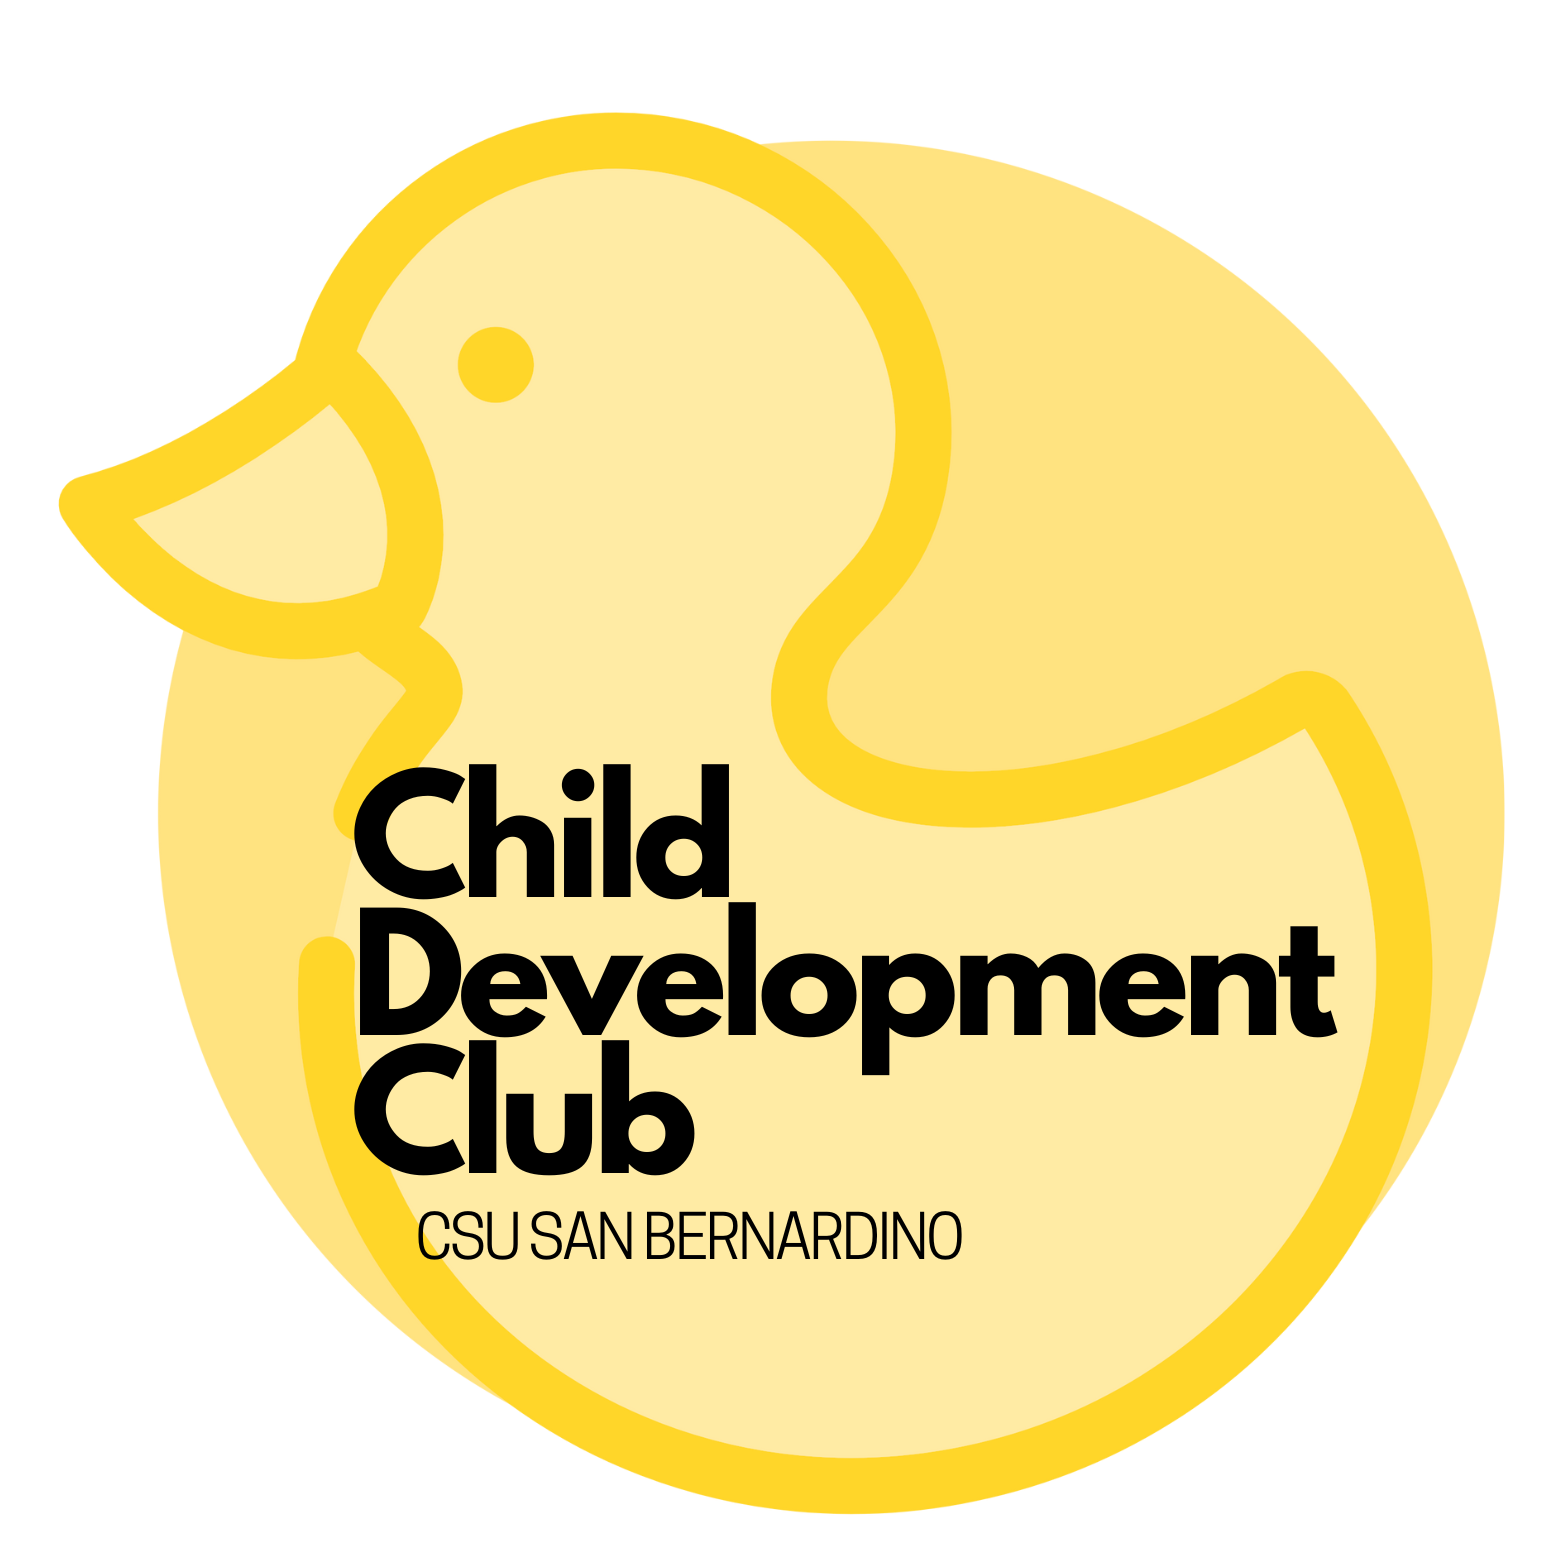 Child Development Club Logo - Rubber Duck with Club Name